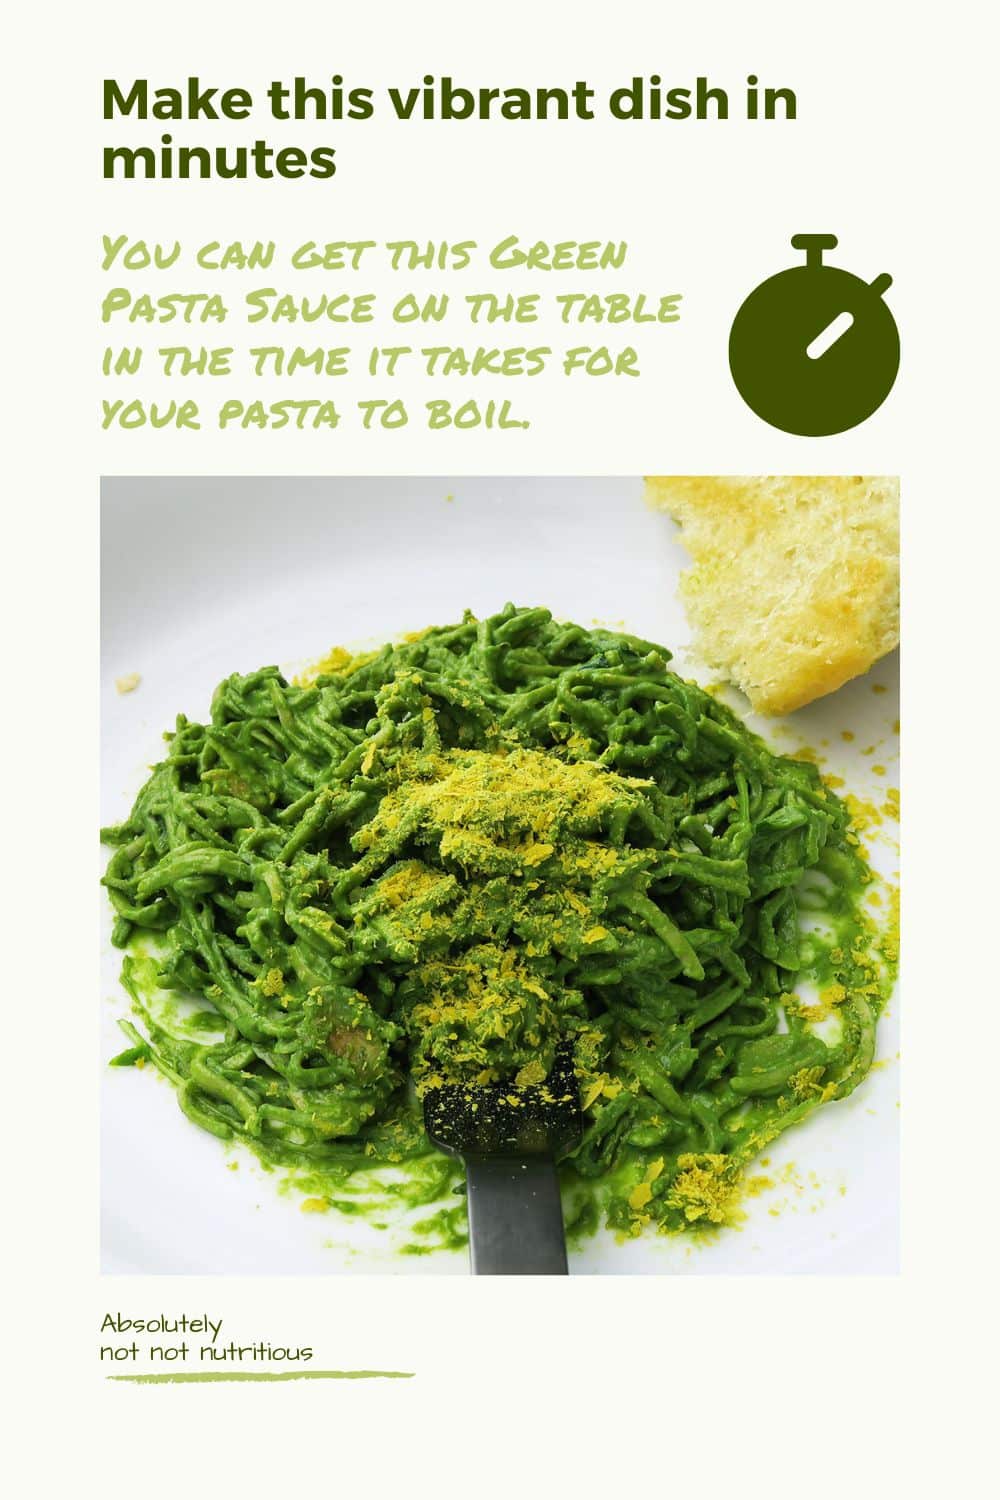 Pin for Green Pasta Sauce. Make this vibrant dish in minutes. You can get this green pasta sauce on the table in the time it takes for your pasta to boil. Close up image of spaghetti with green pasta sauce